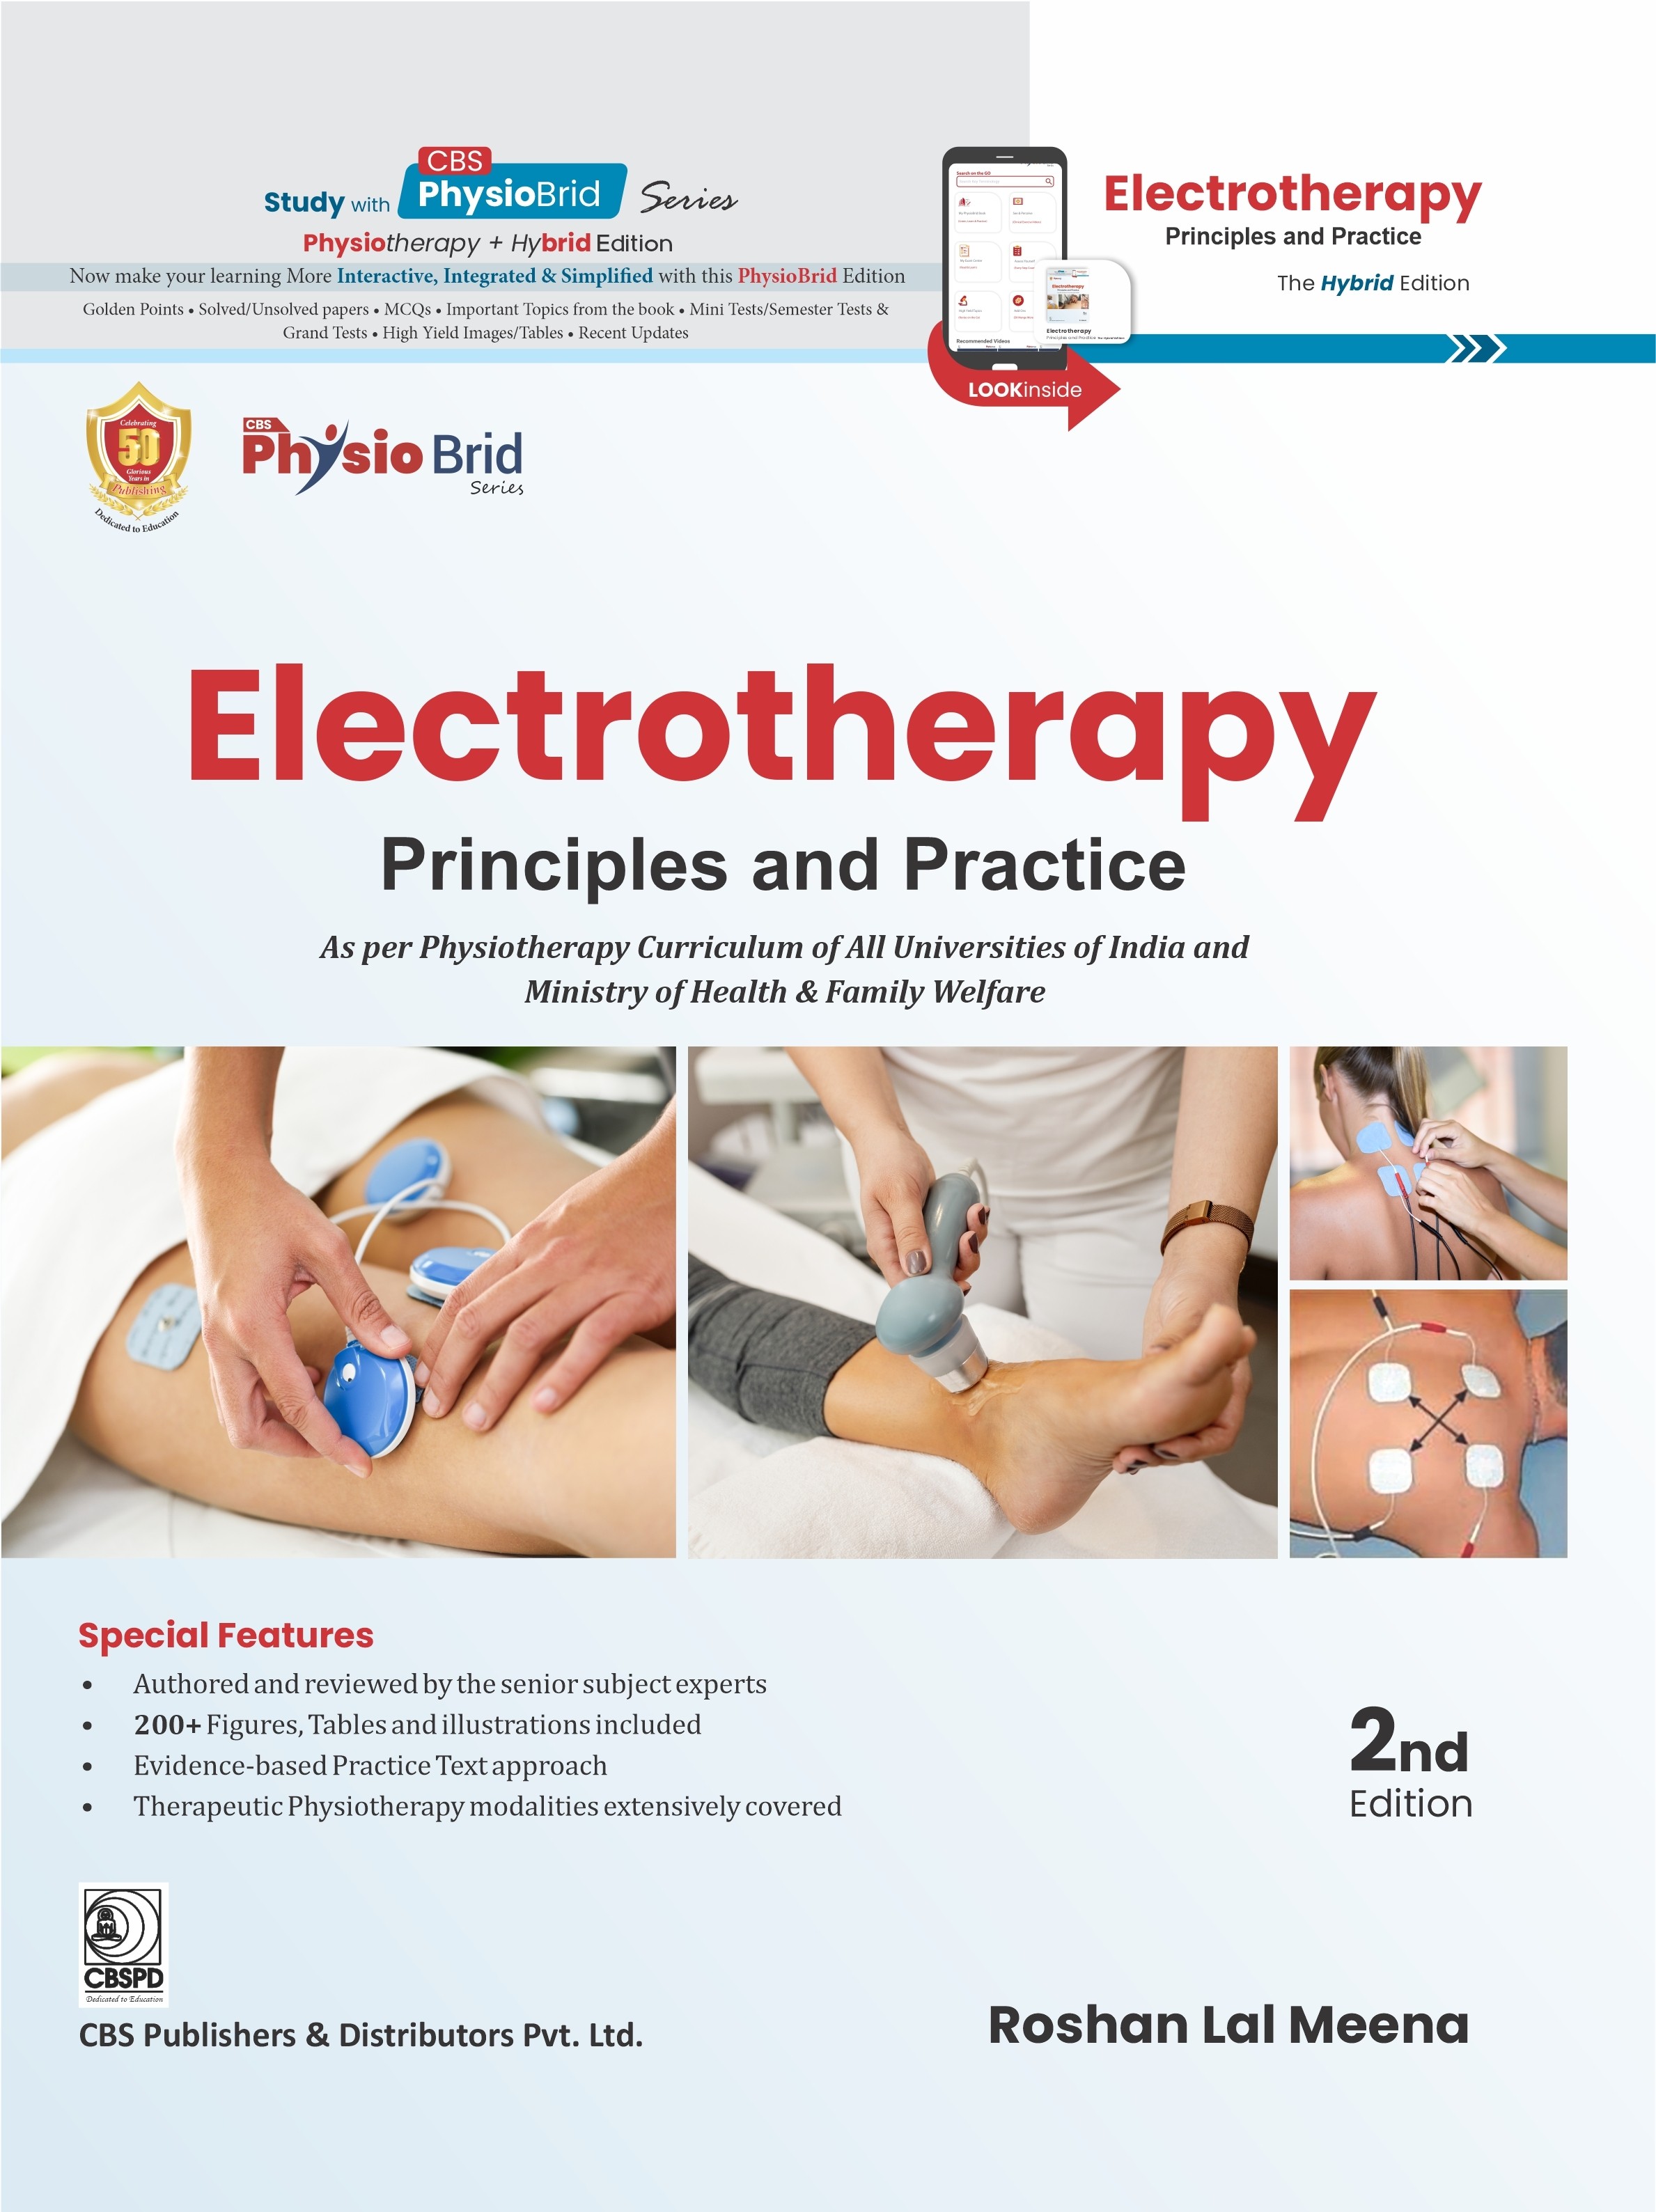 Electrotherapy Principles and Practice As per Physiotherapy Curriculum of All Universities of India and Ministry of Health & Family Welfare